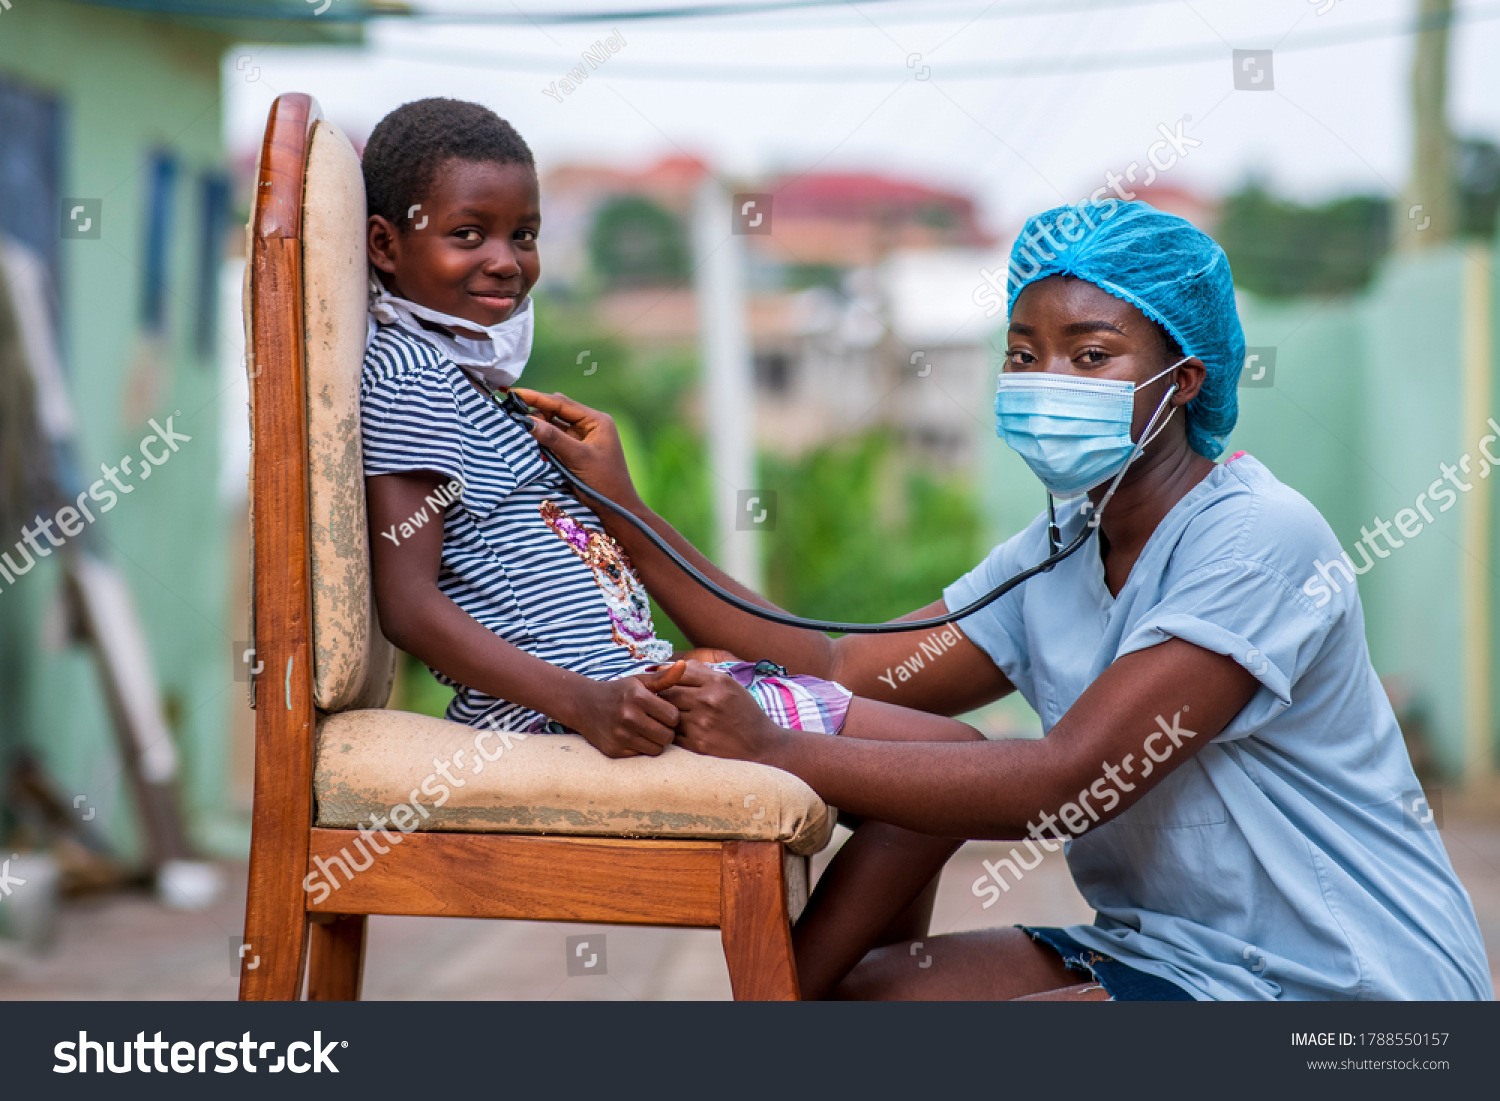 African health worker wearing a surgical face mask and child wearing homemade mask for protection,auscultating child chest,both looking at camera-concept on child health in covid-19 pandemic #1788550157